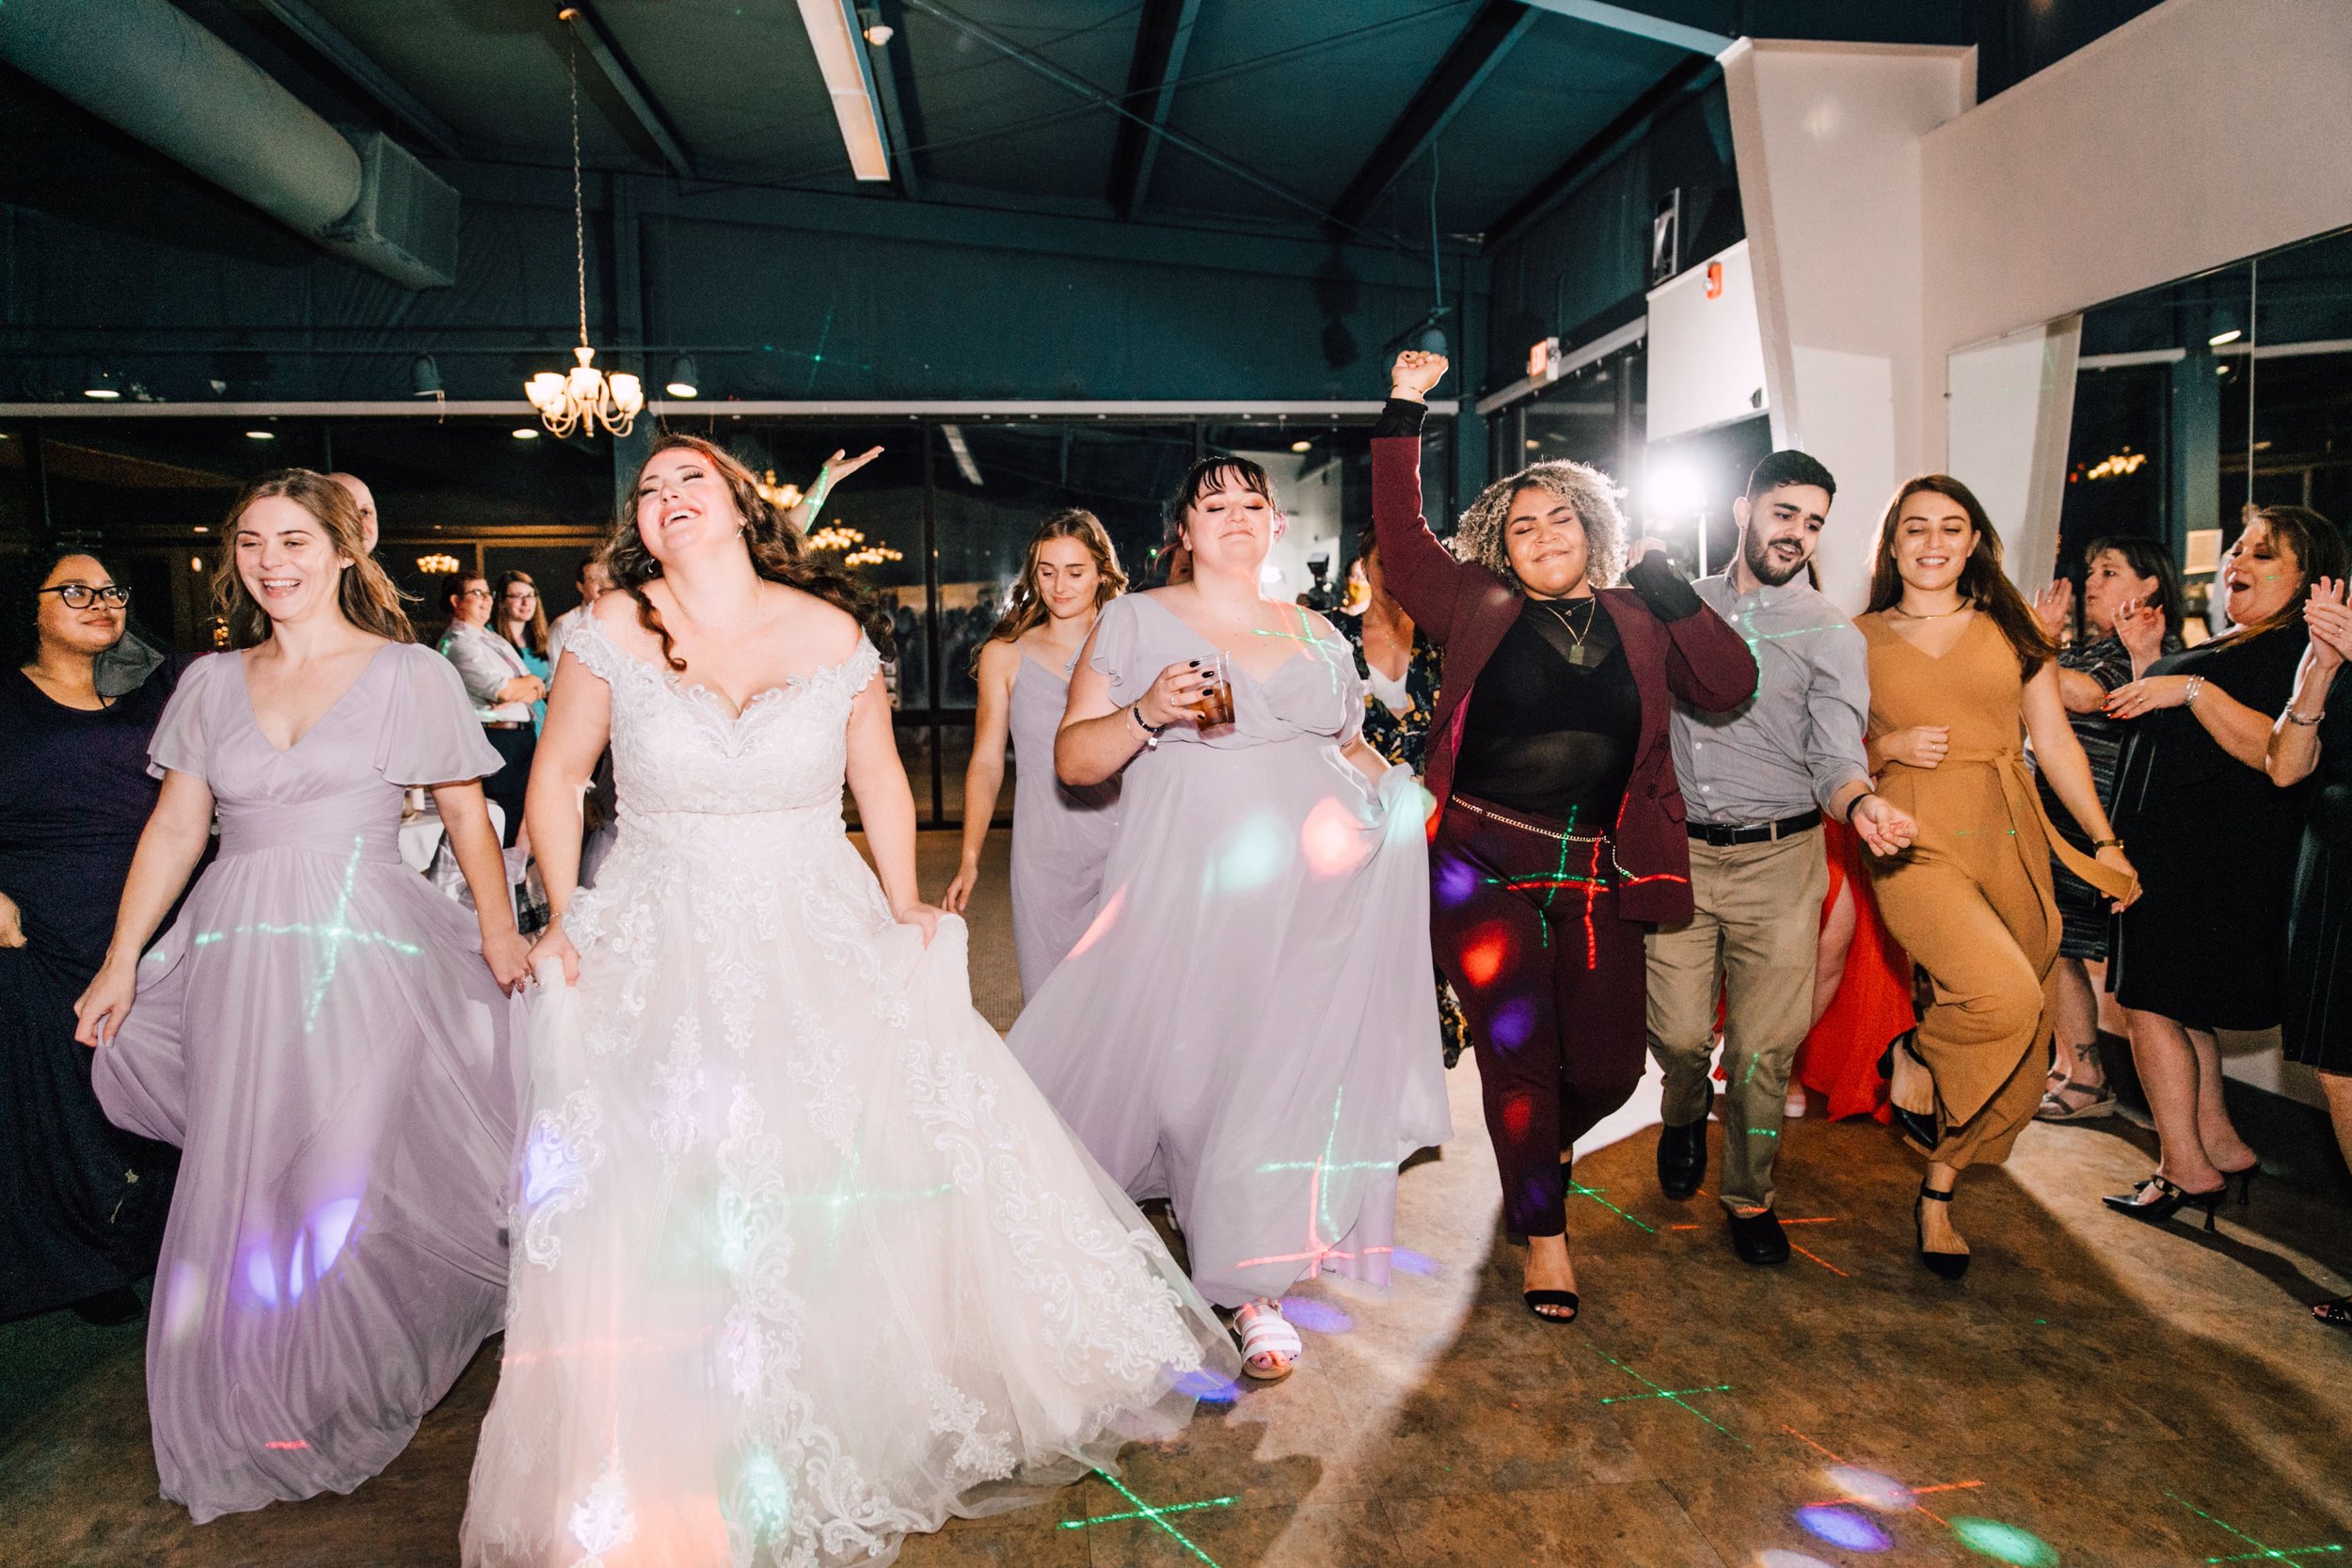  the bride dances with her bridesmaids during her library wedding reception in Endwell, NY 